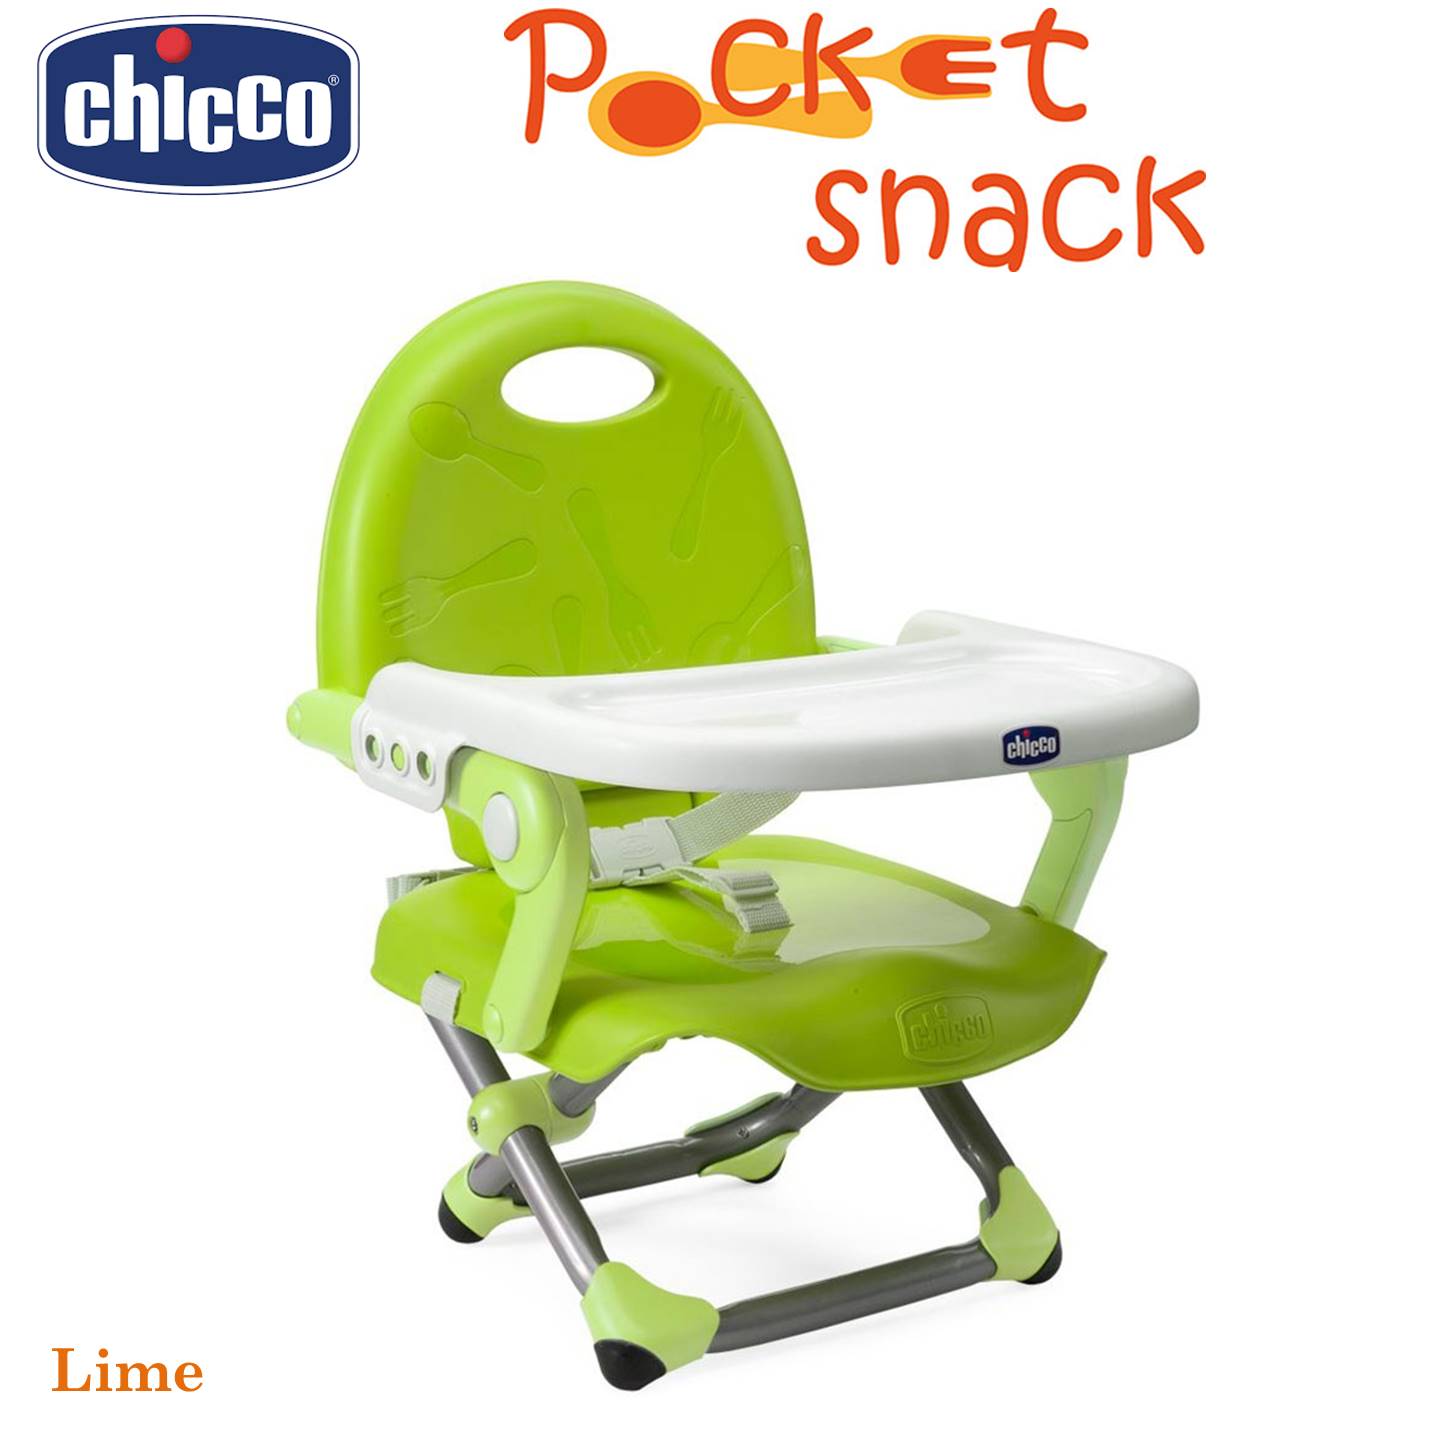 CH410793405500 Chicco Pocket Snack Booster Seat -Lime (1)